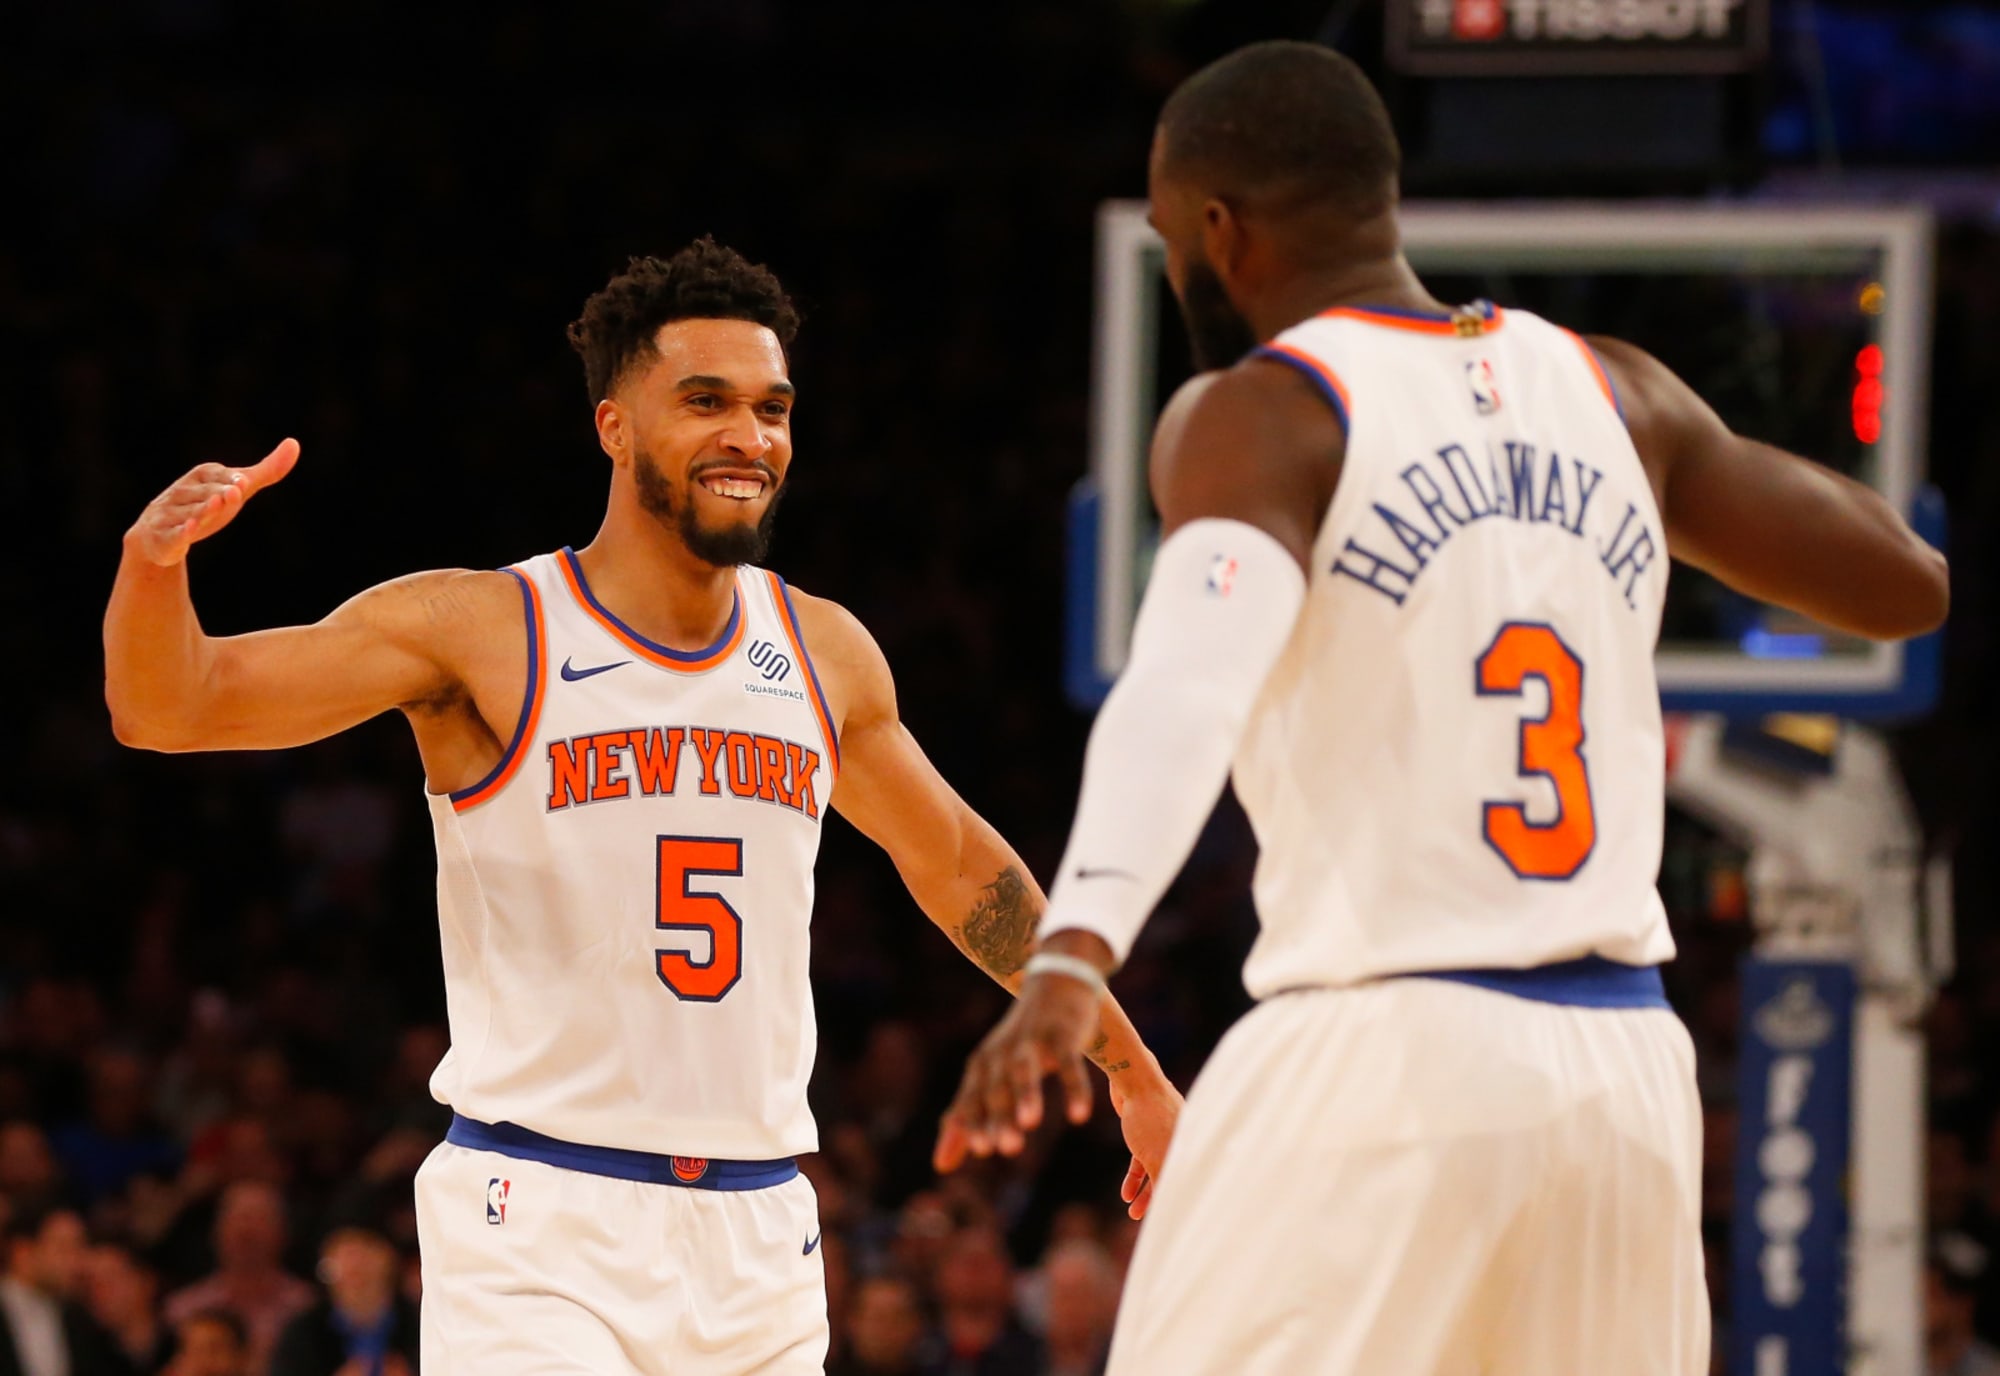 New York Knicks: The dilemma of trading assets to open cap space